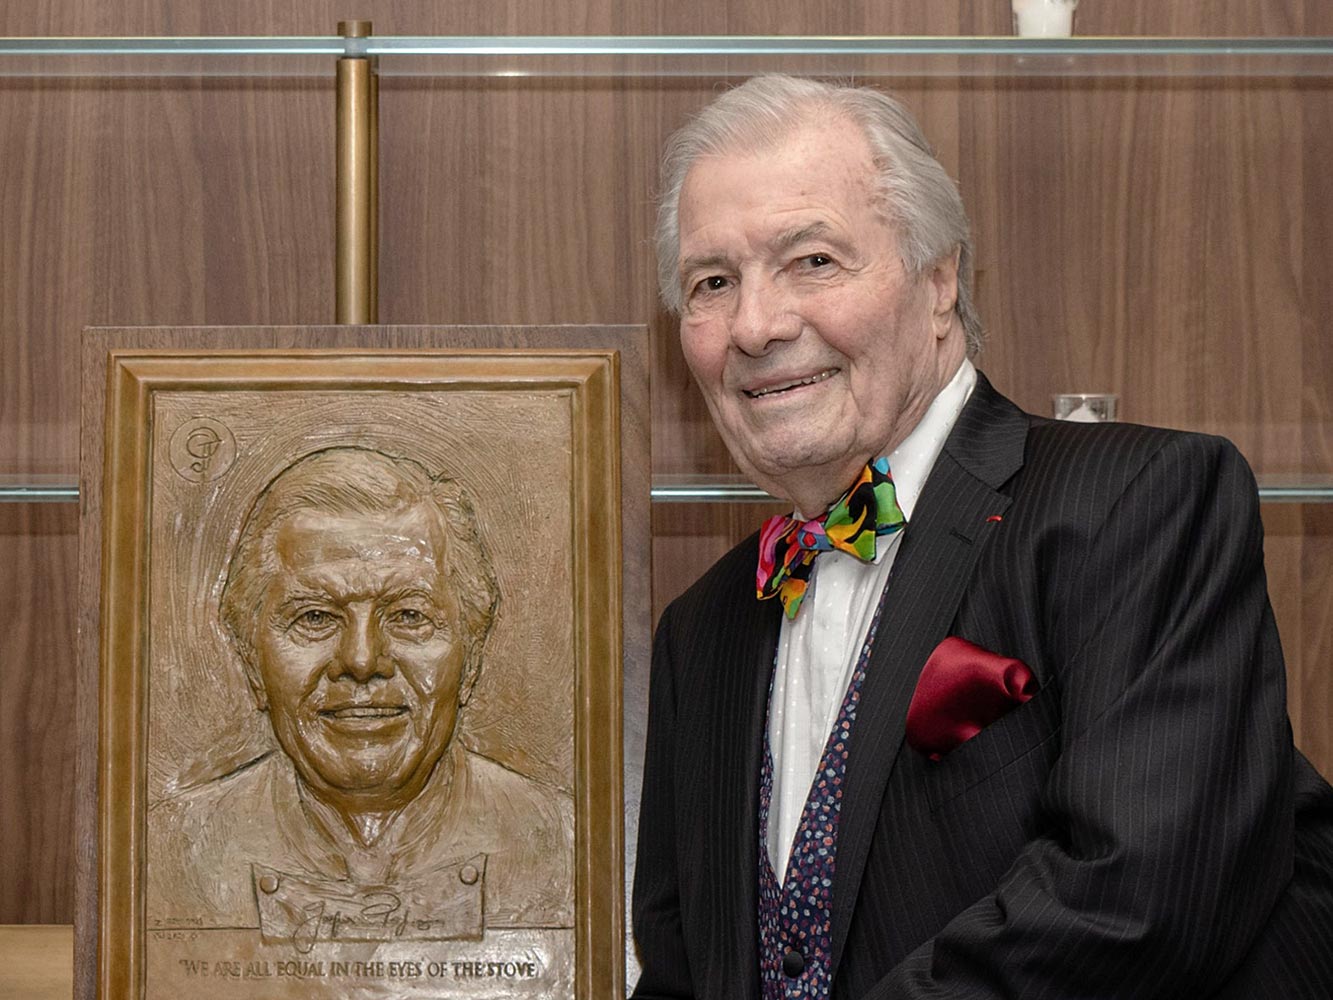 Jacques Pépin Guest of Honor at Culinary Education Gala